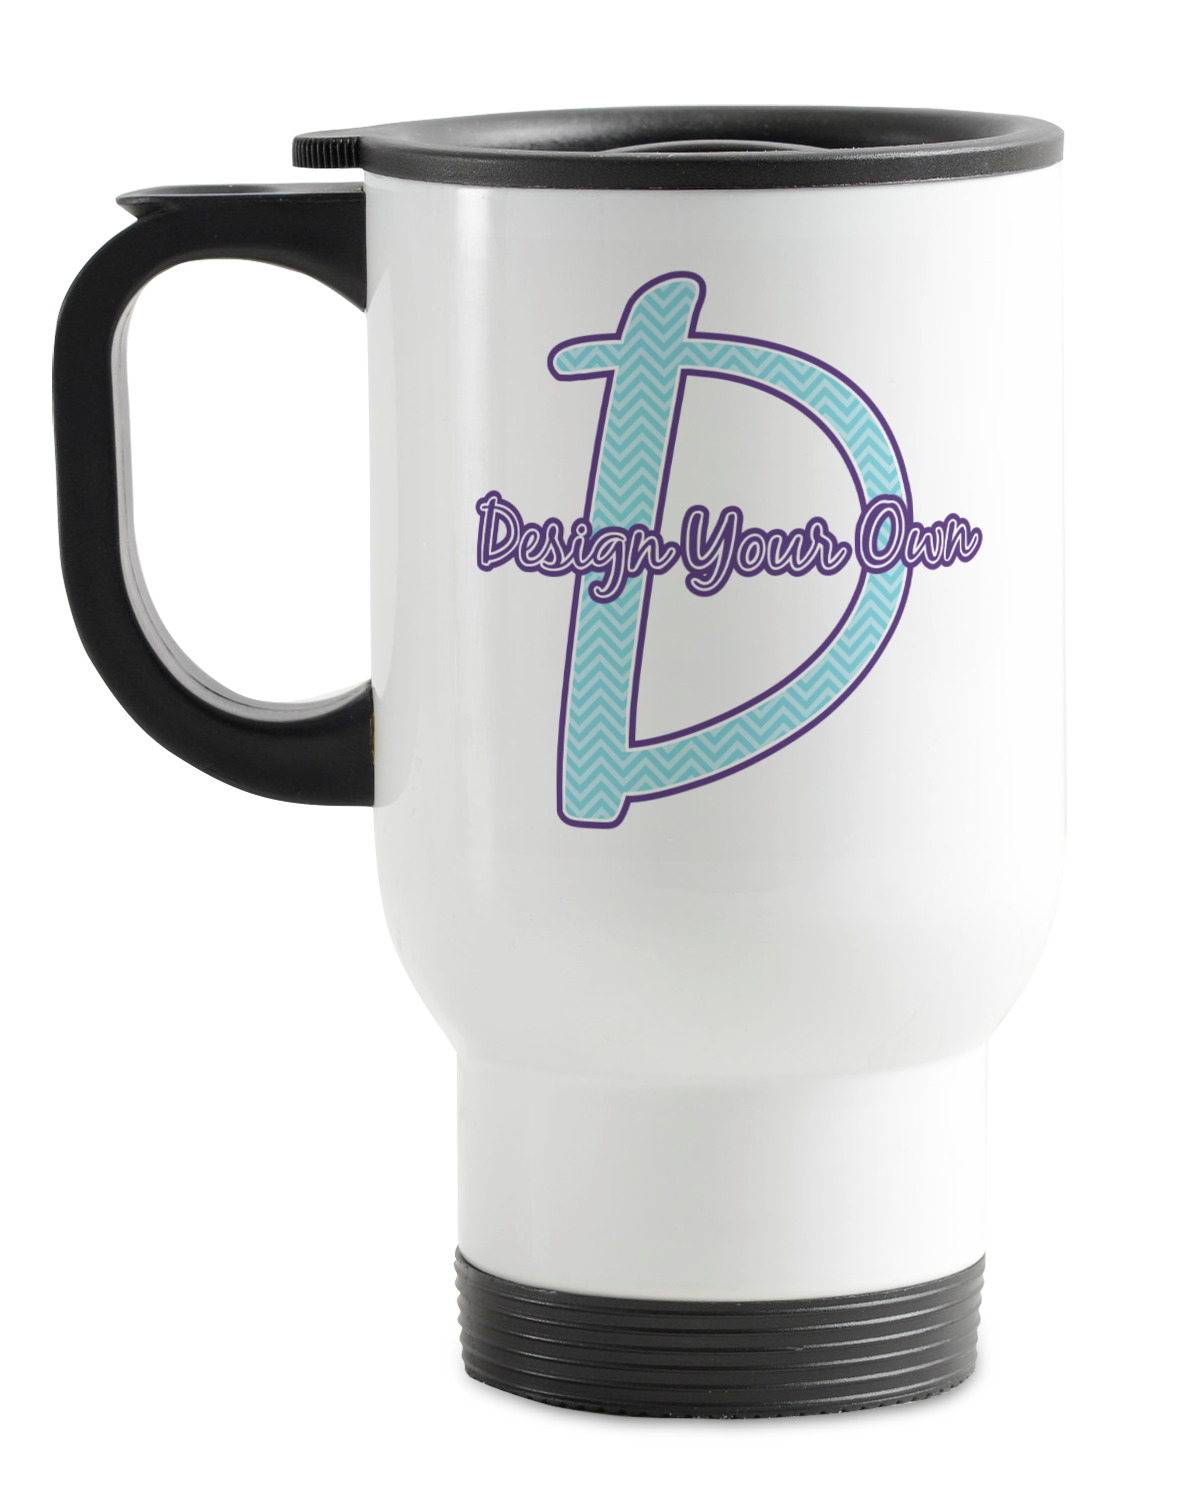 https://www.youcustomizeit.com/common/MAKE/965833/Design-Your-Own-Stainless-Steel-Travel-Mug-with-Handle.jpg?lm=1670304127